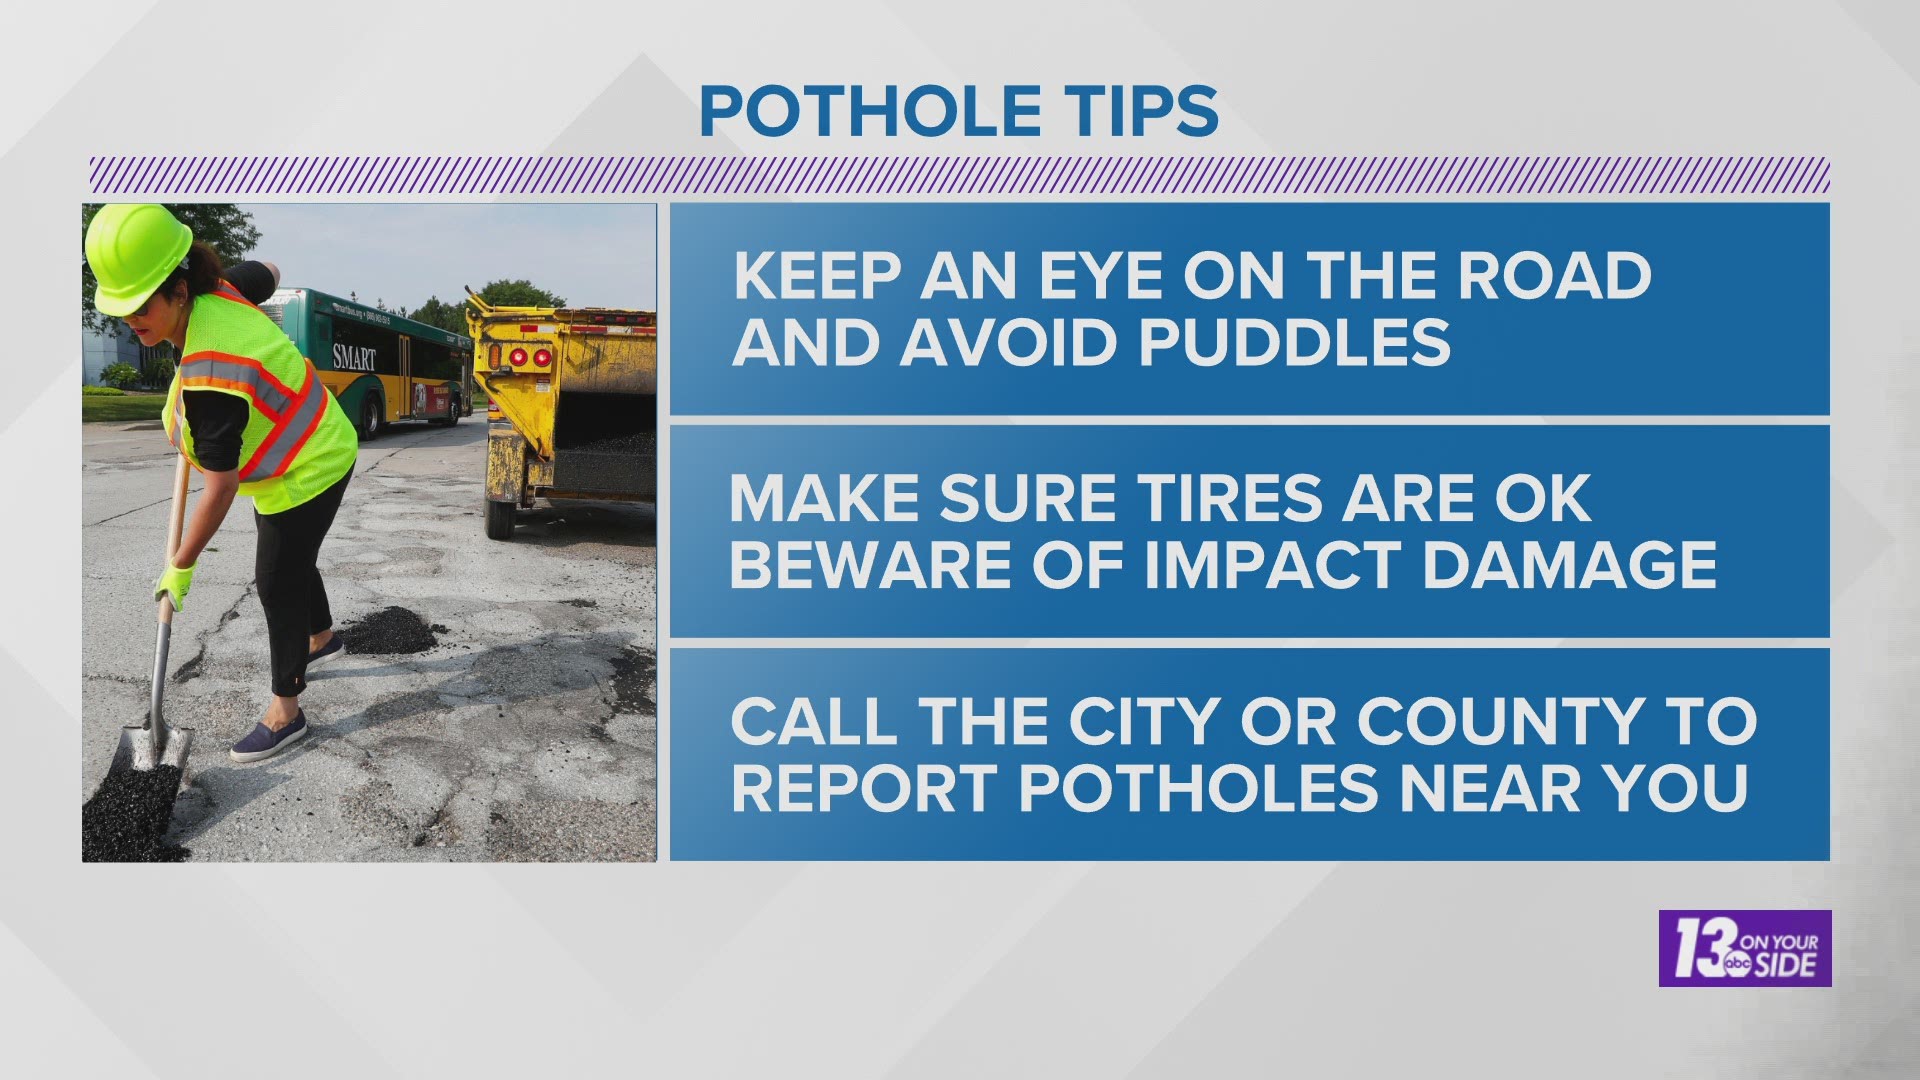 13 ON YOUR SIDE Meteorologist Michael Behrens explains the science behind potholes.